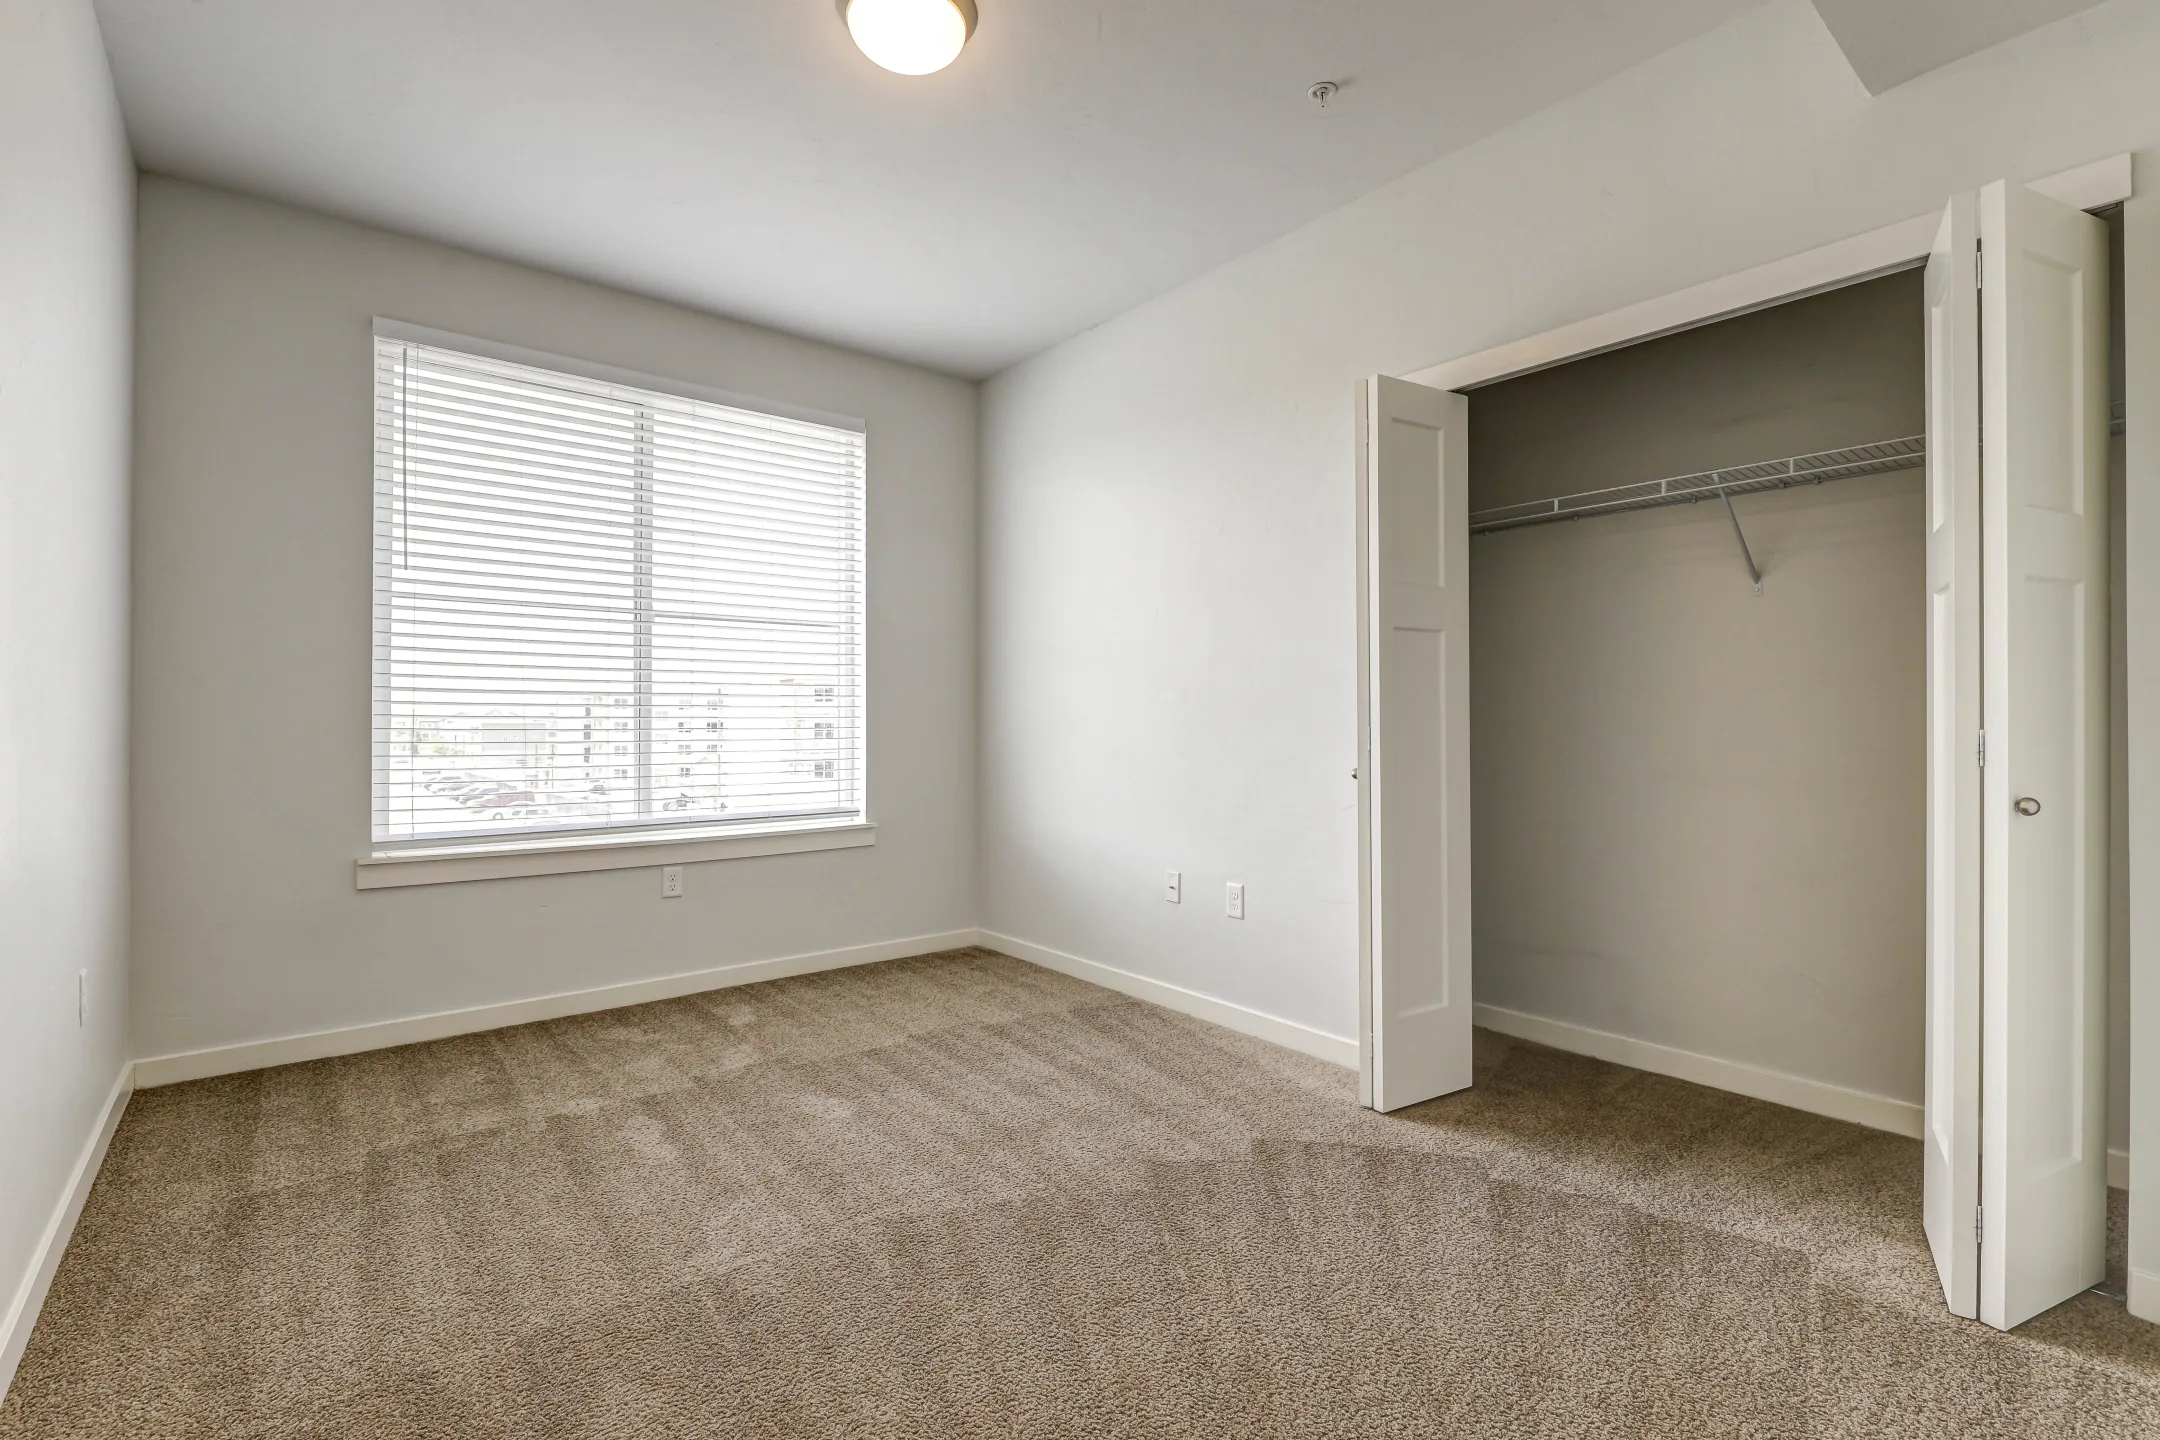 Connect at First Creek - 17900 E 56th Ave | Denver, CO Apartments for ...